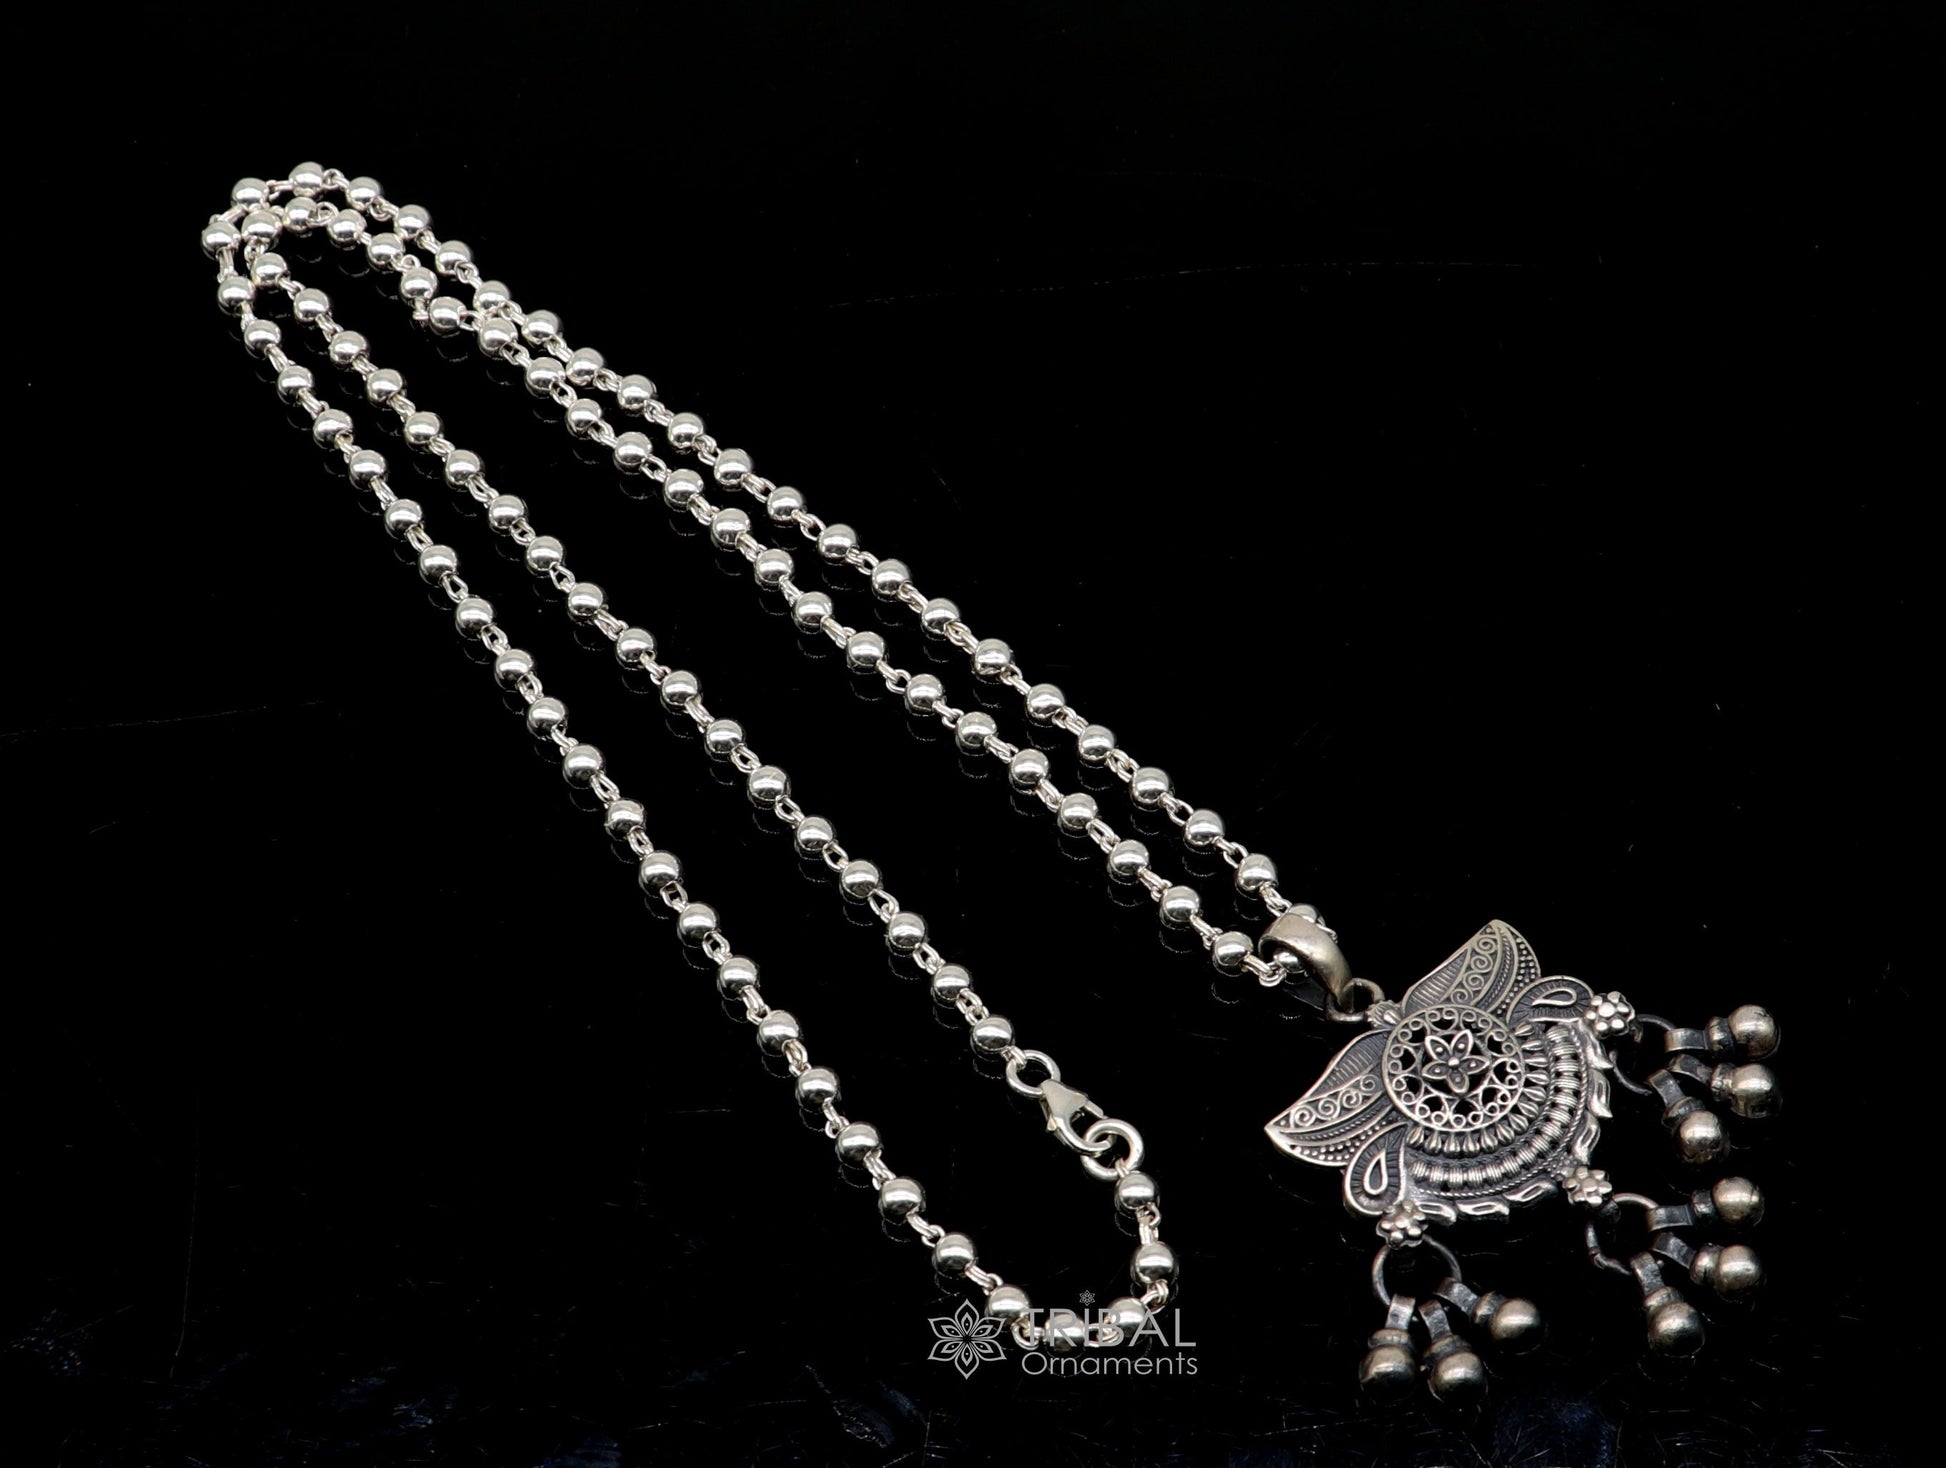 925 sterling silver handmade vintage beaded chain necklace amazing floral pendant with hanging drops, ethnic tribal long set jewelry set588 - TRIBAL ORNAMENTS